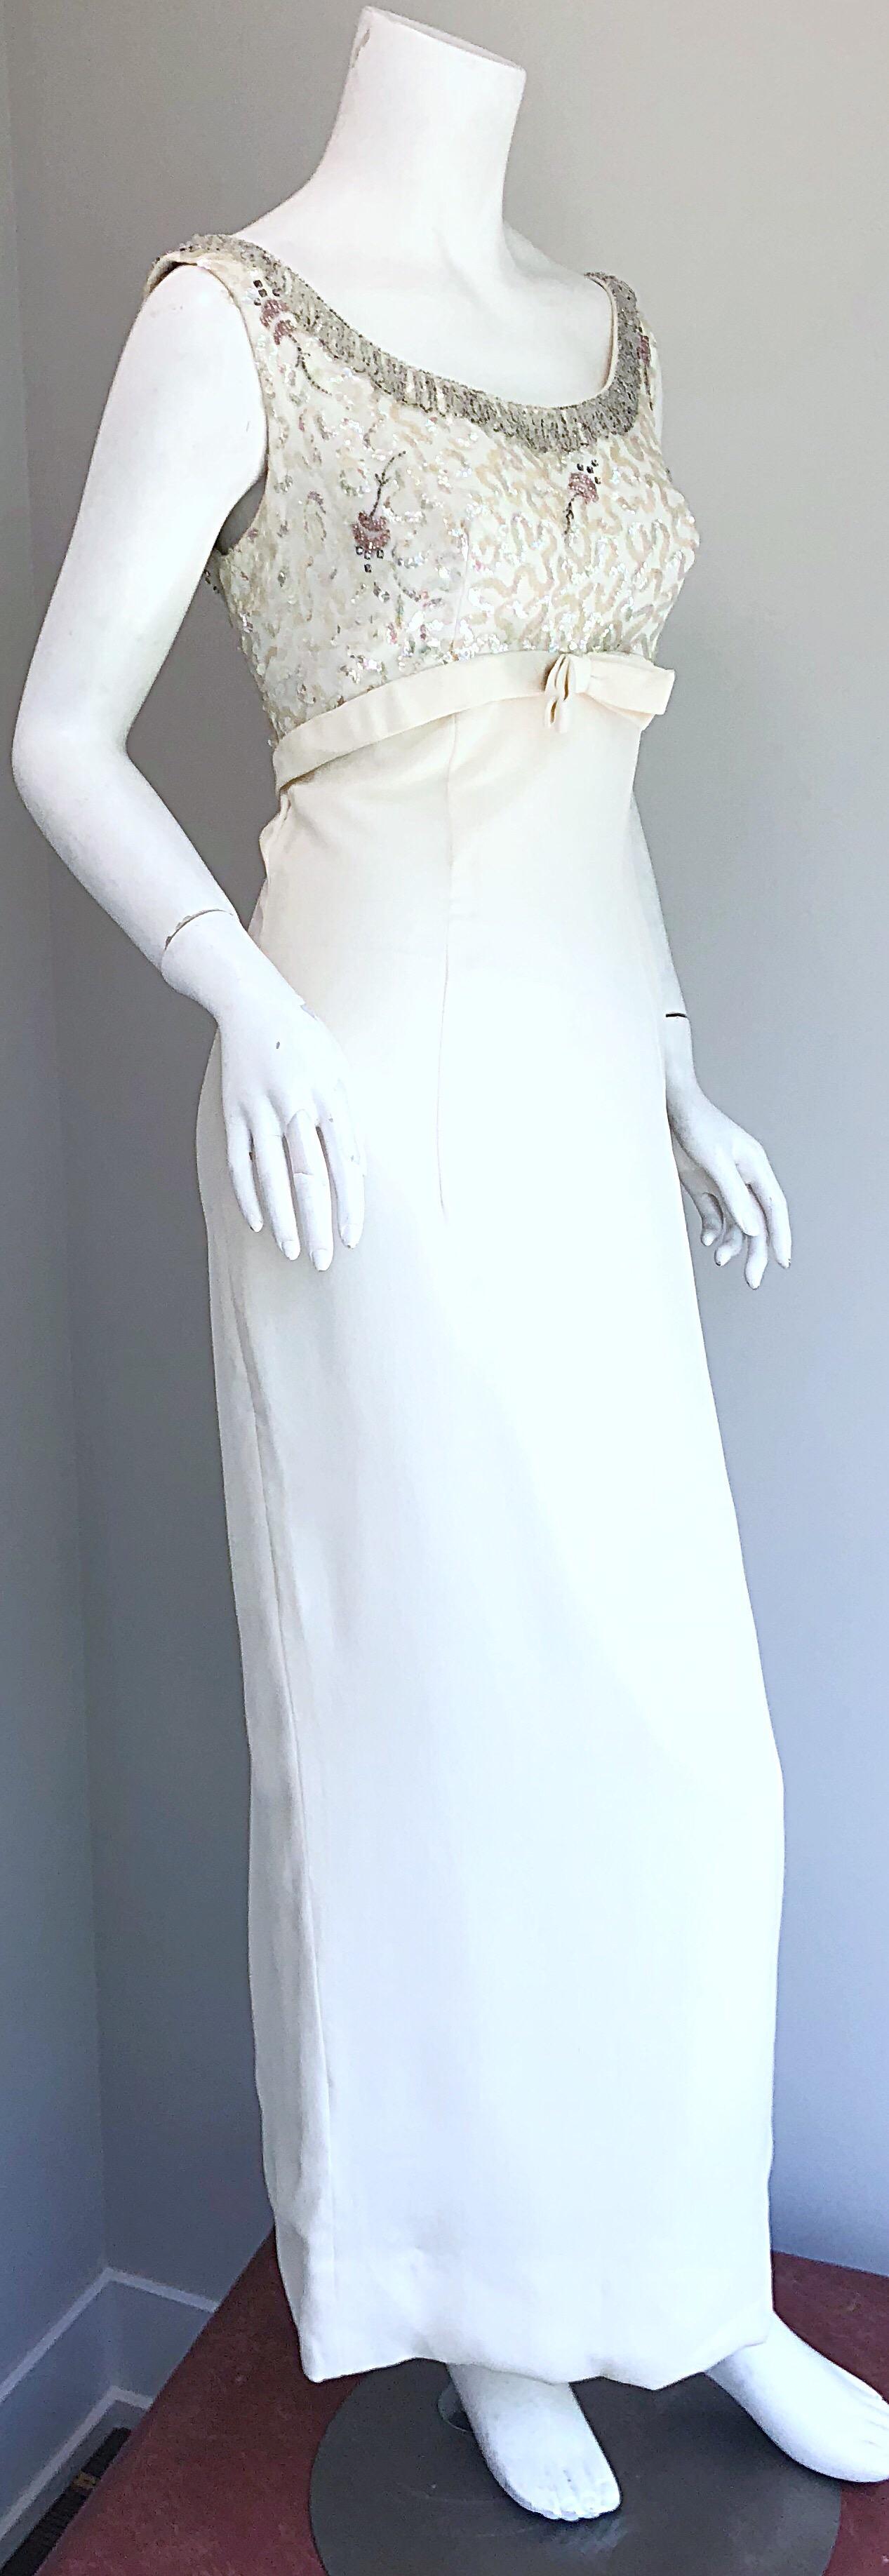 Gorgeous 1960s White Sequin Beaded Vintage Crepe 60s Evening Gown Dress 2